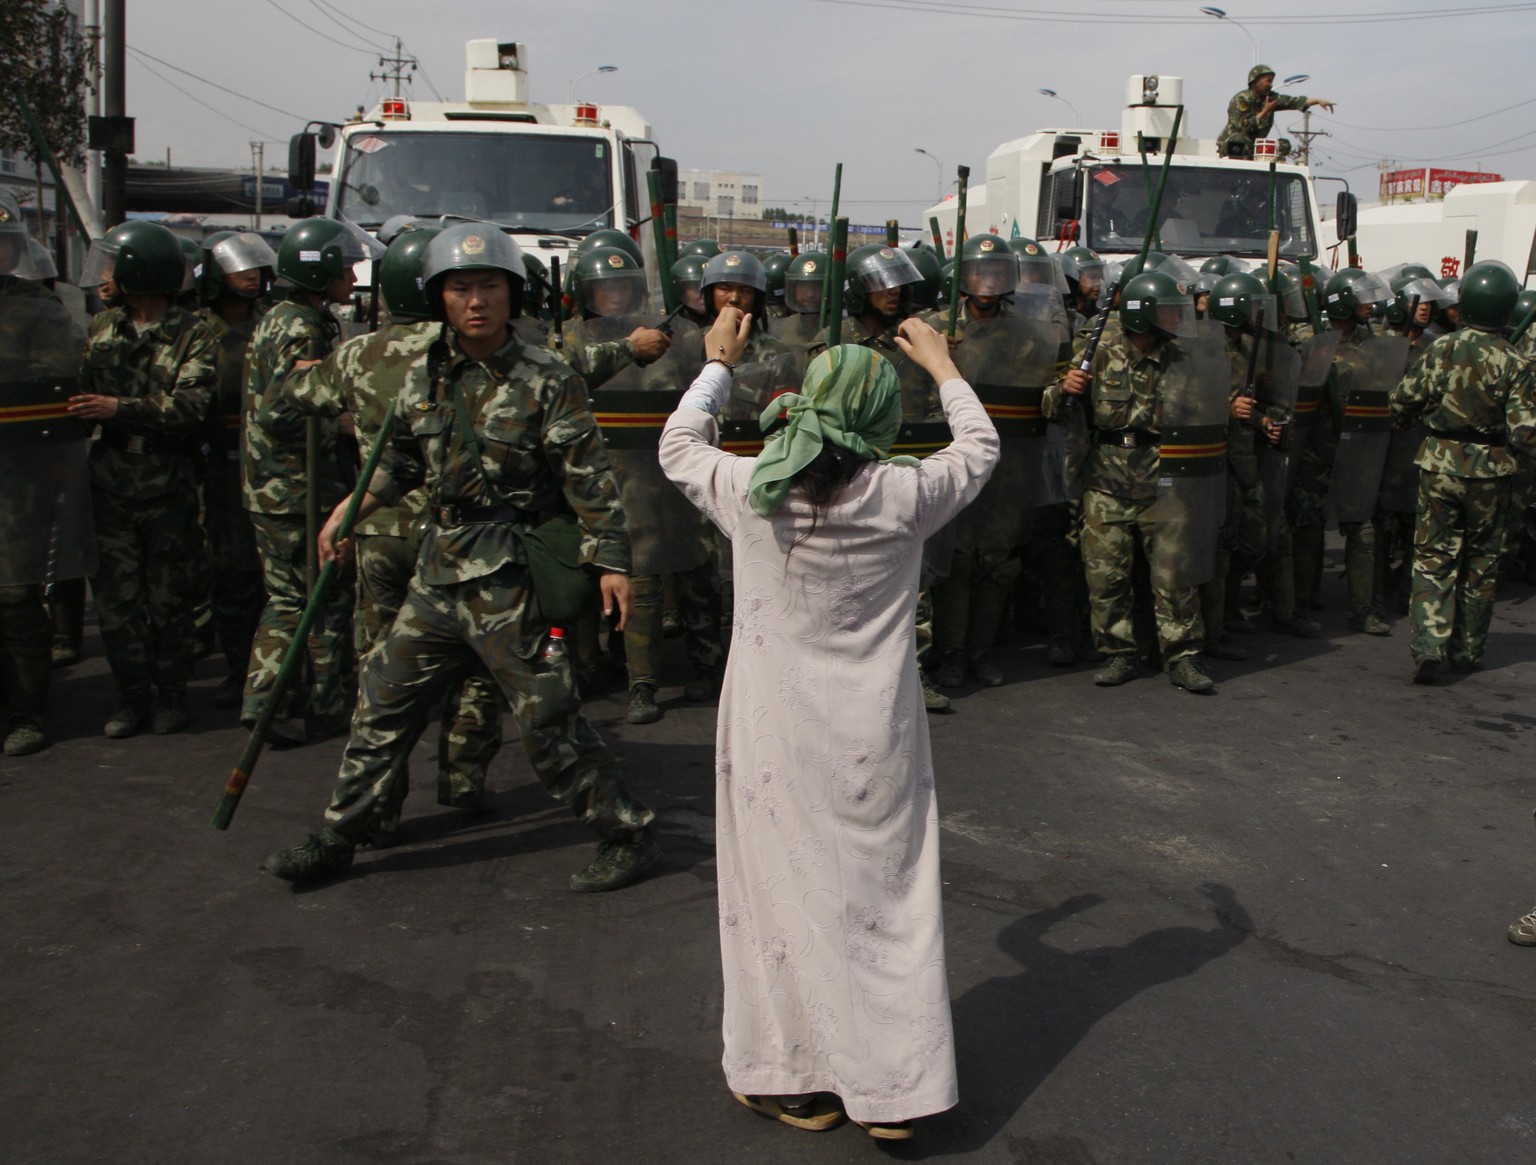 In this photo taken Tuesday, July 7, 2009, a Uighur woman protests before a group of paramilitary police when journalists visited the area in the aftermath of riots in Urumqi in western China's Xinjiang region. Analysts say the Urumqi riots in 2009 set in motion the harsh security measures now in place across Xinjiang, where about 1 million Uighurs, Kazakhs and other Muslims are estimated to be held in heavily-guarded internment camps _ also called 